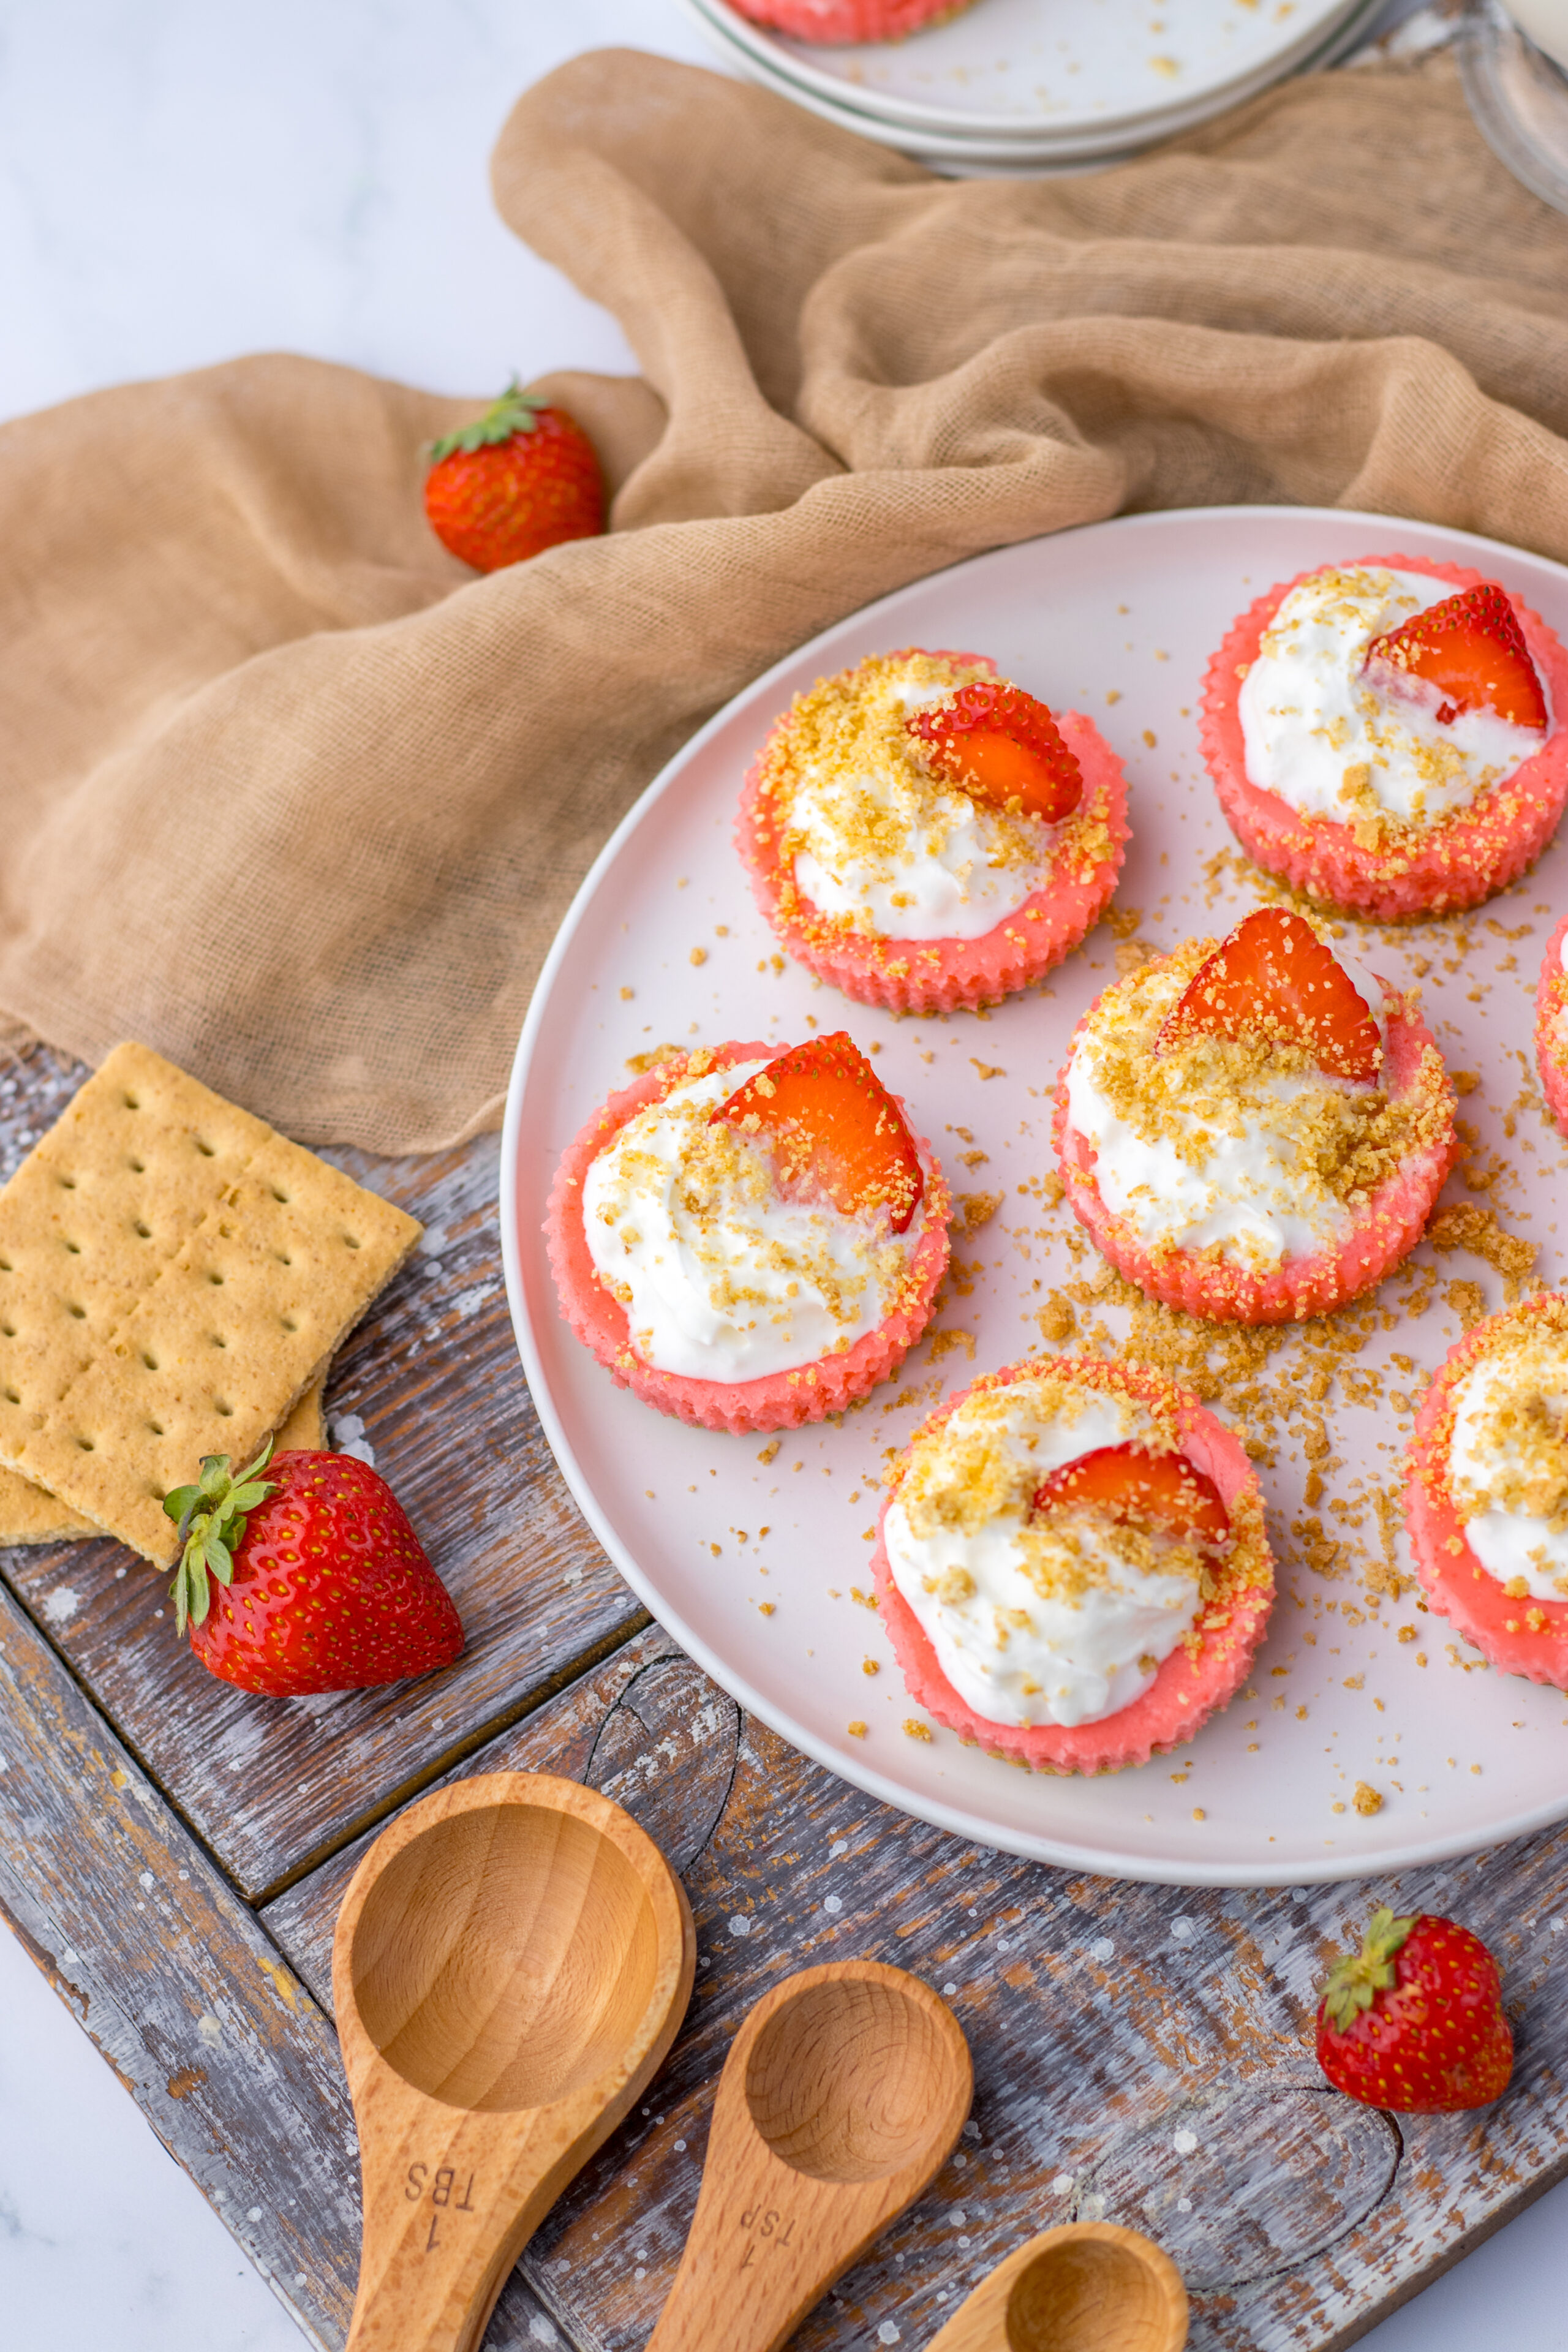 a plate of mini strawberry cheesecakes ready to serve and enjoy.